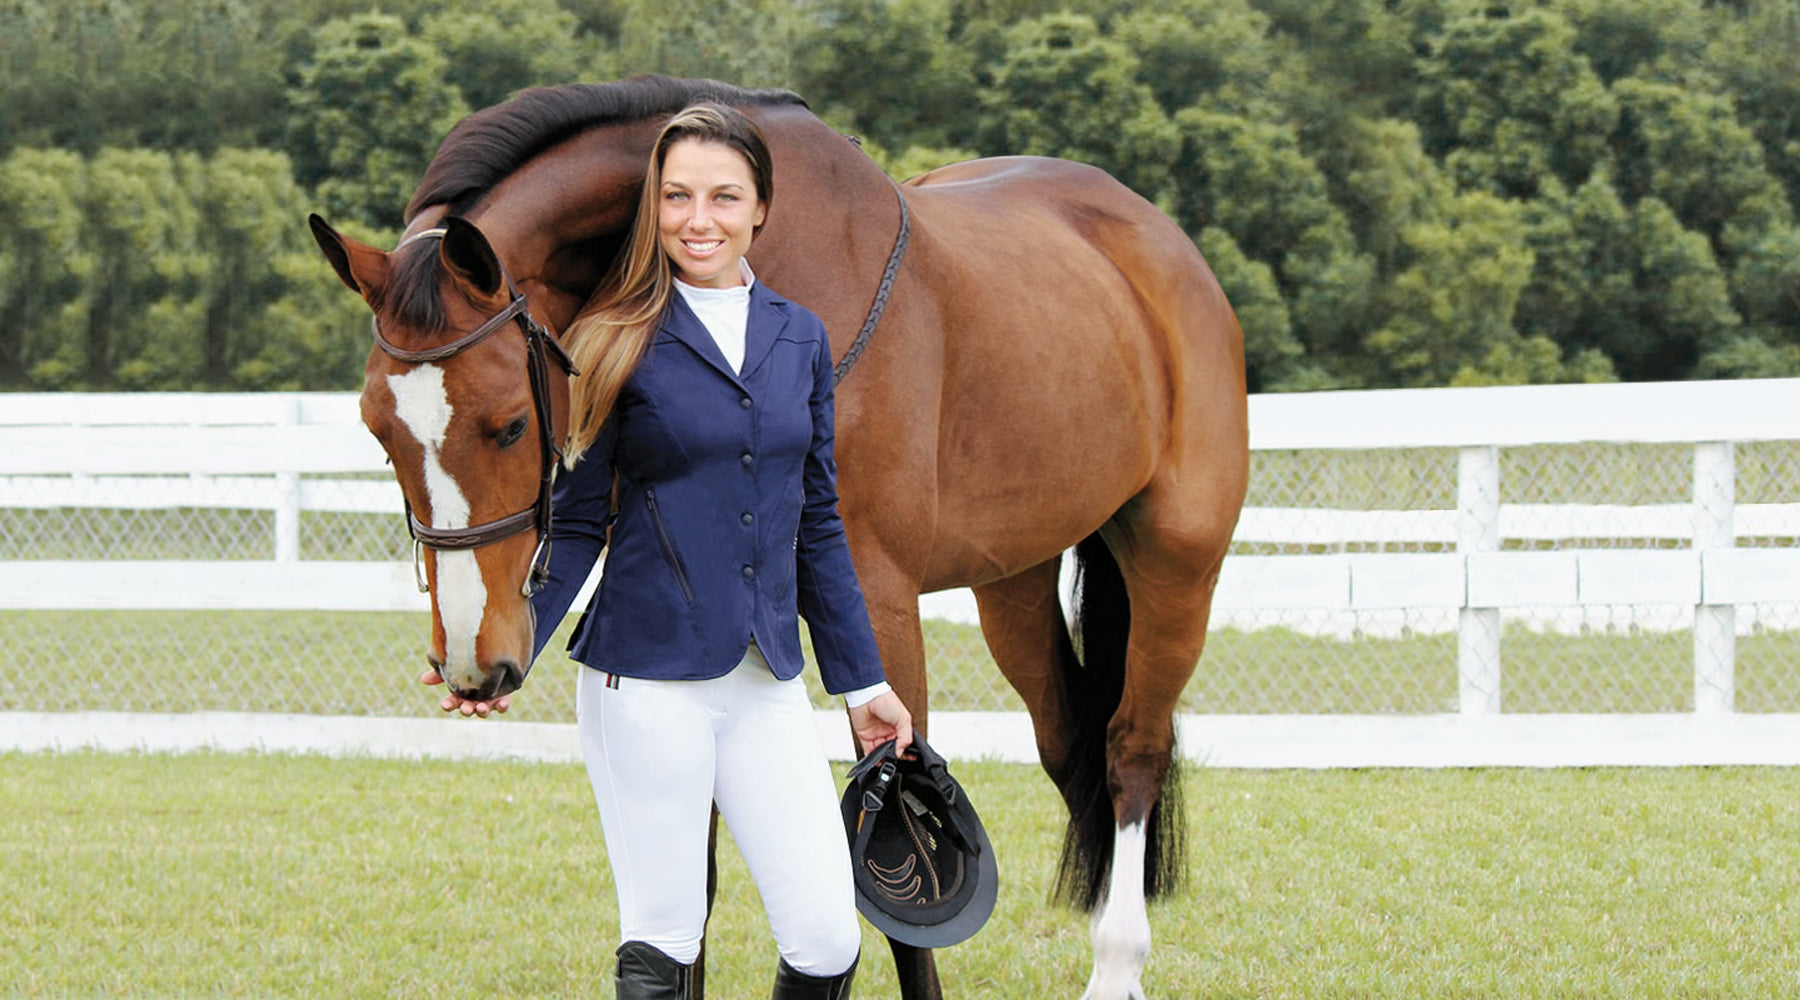 Equestrian Accessories - How to Add Your Own Touch in the Show Ring